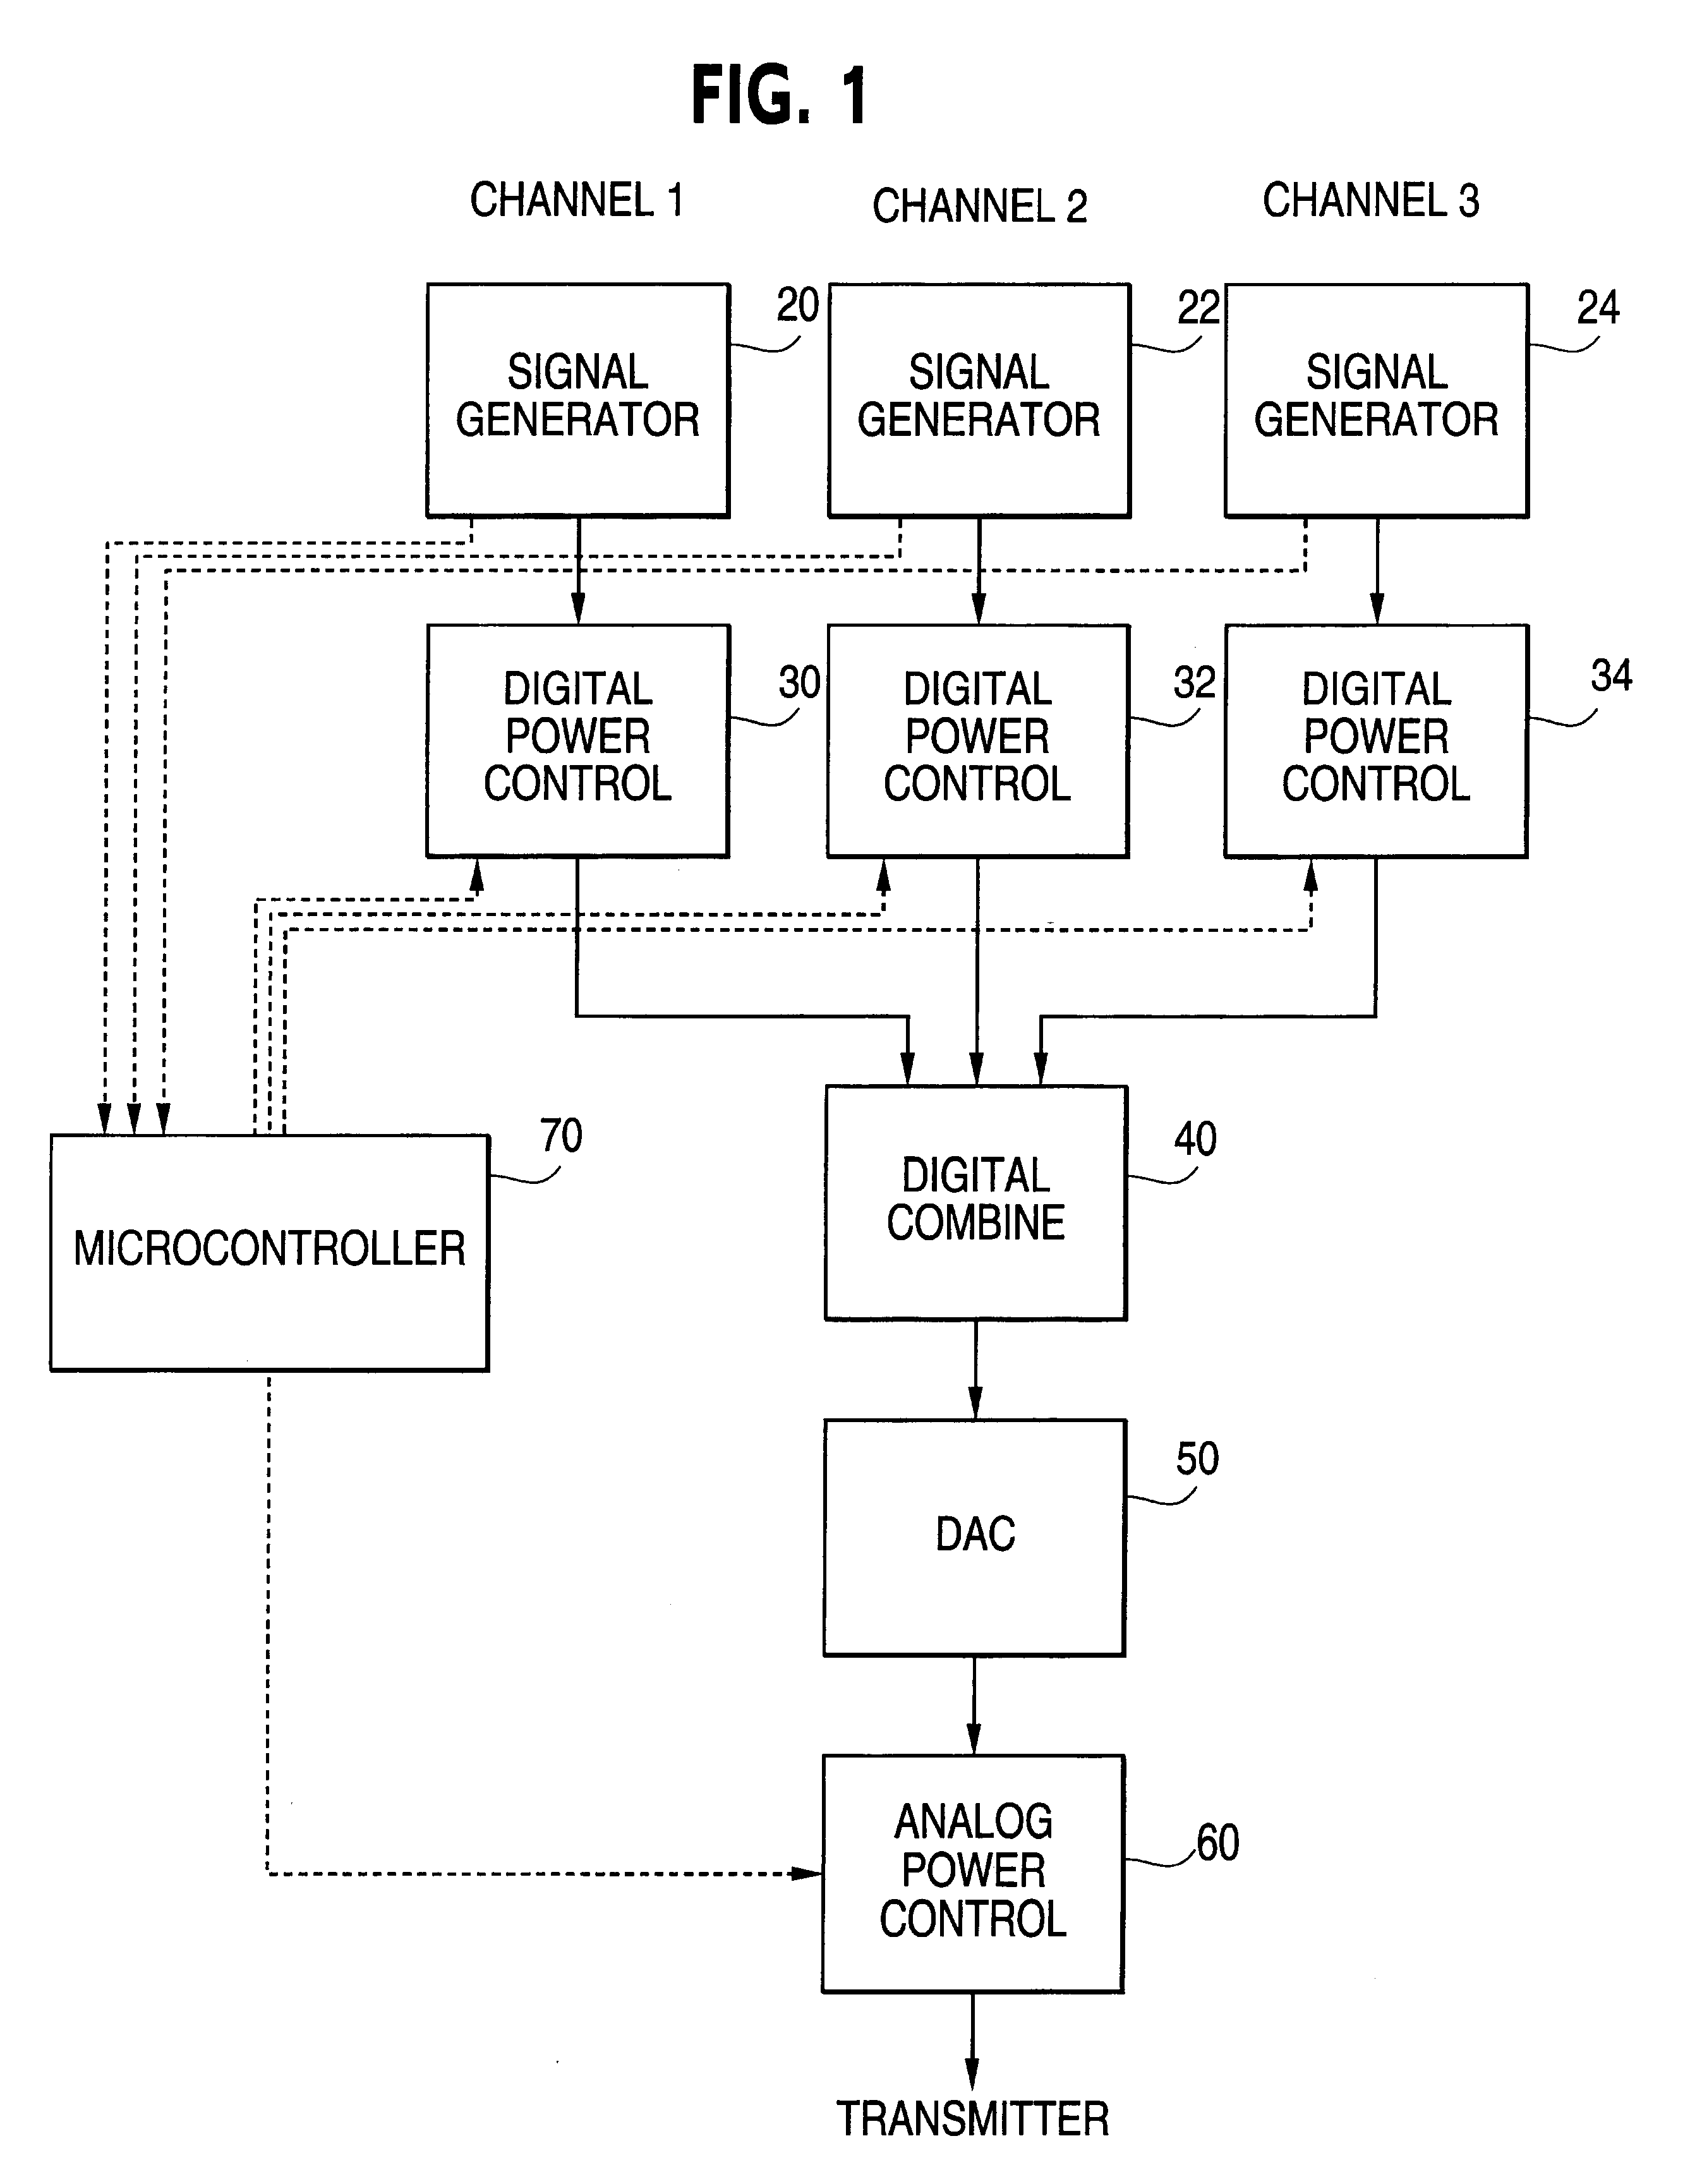 Wideband multicarrier power control for a cellular PCS basestation tranmitter